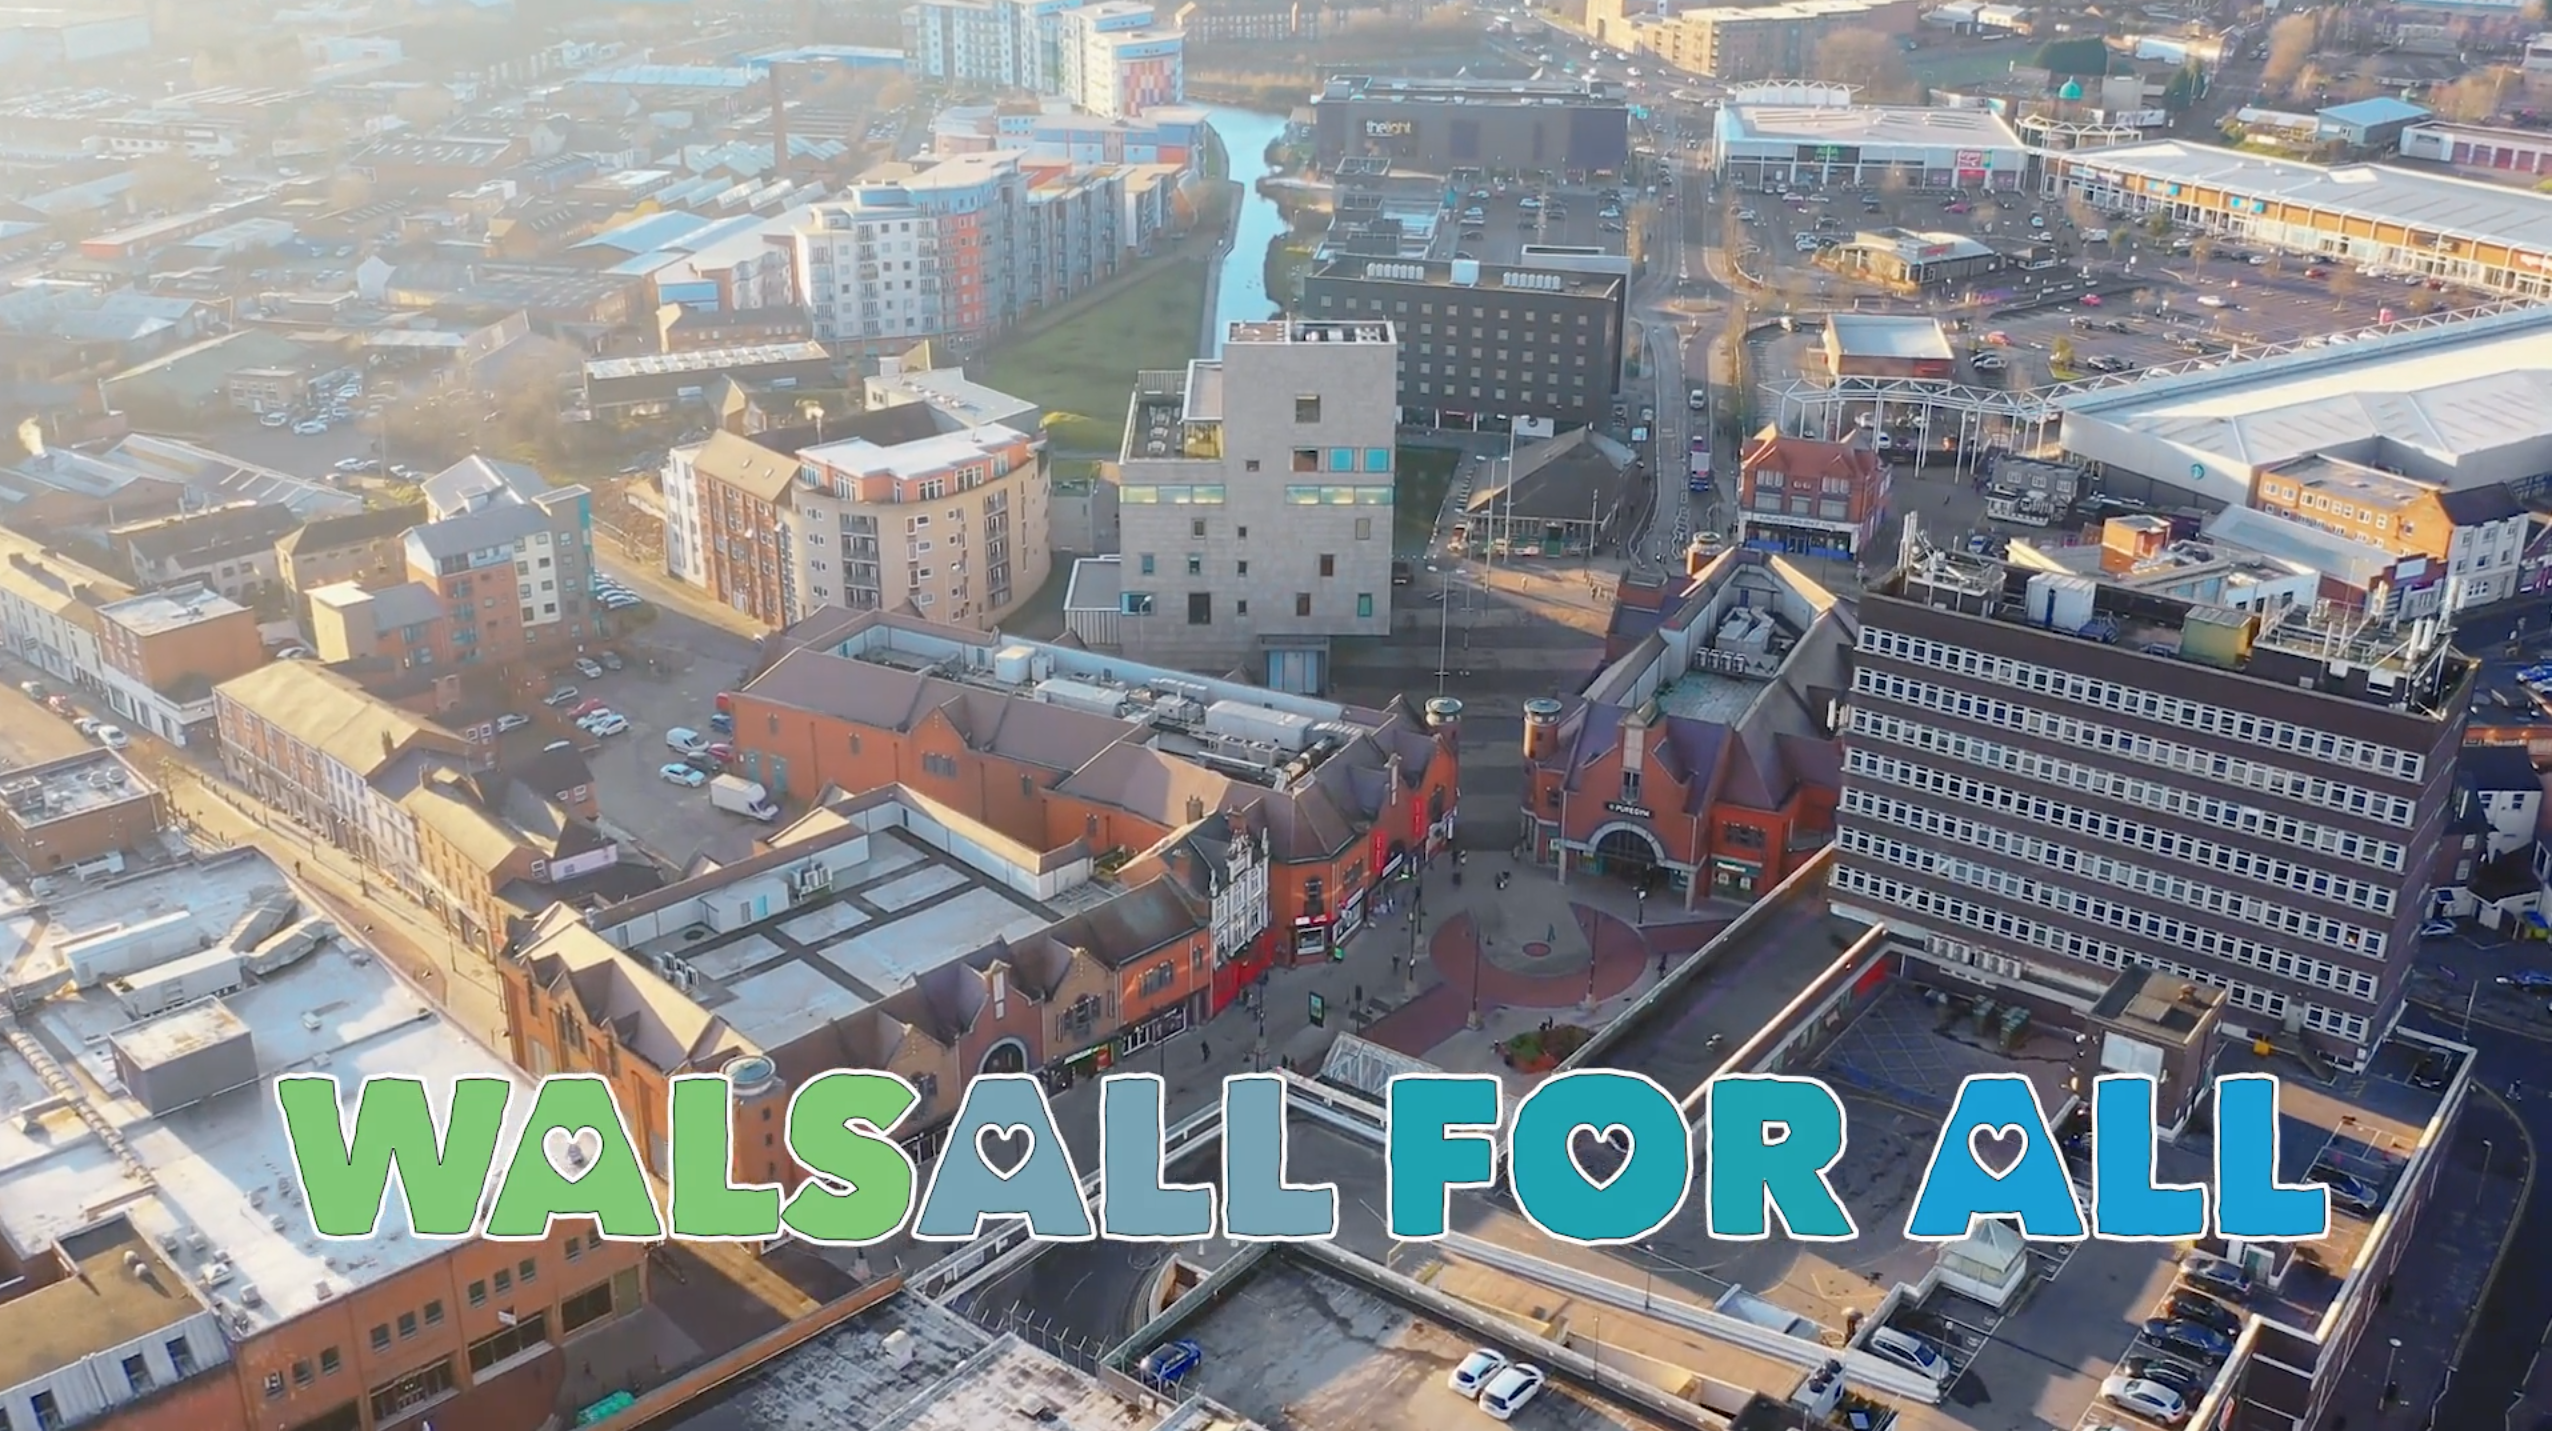 Walsall For All / / An Inspiring Video Campaign In Challenging Times